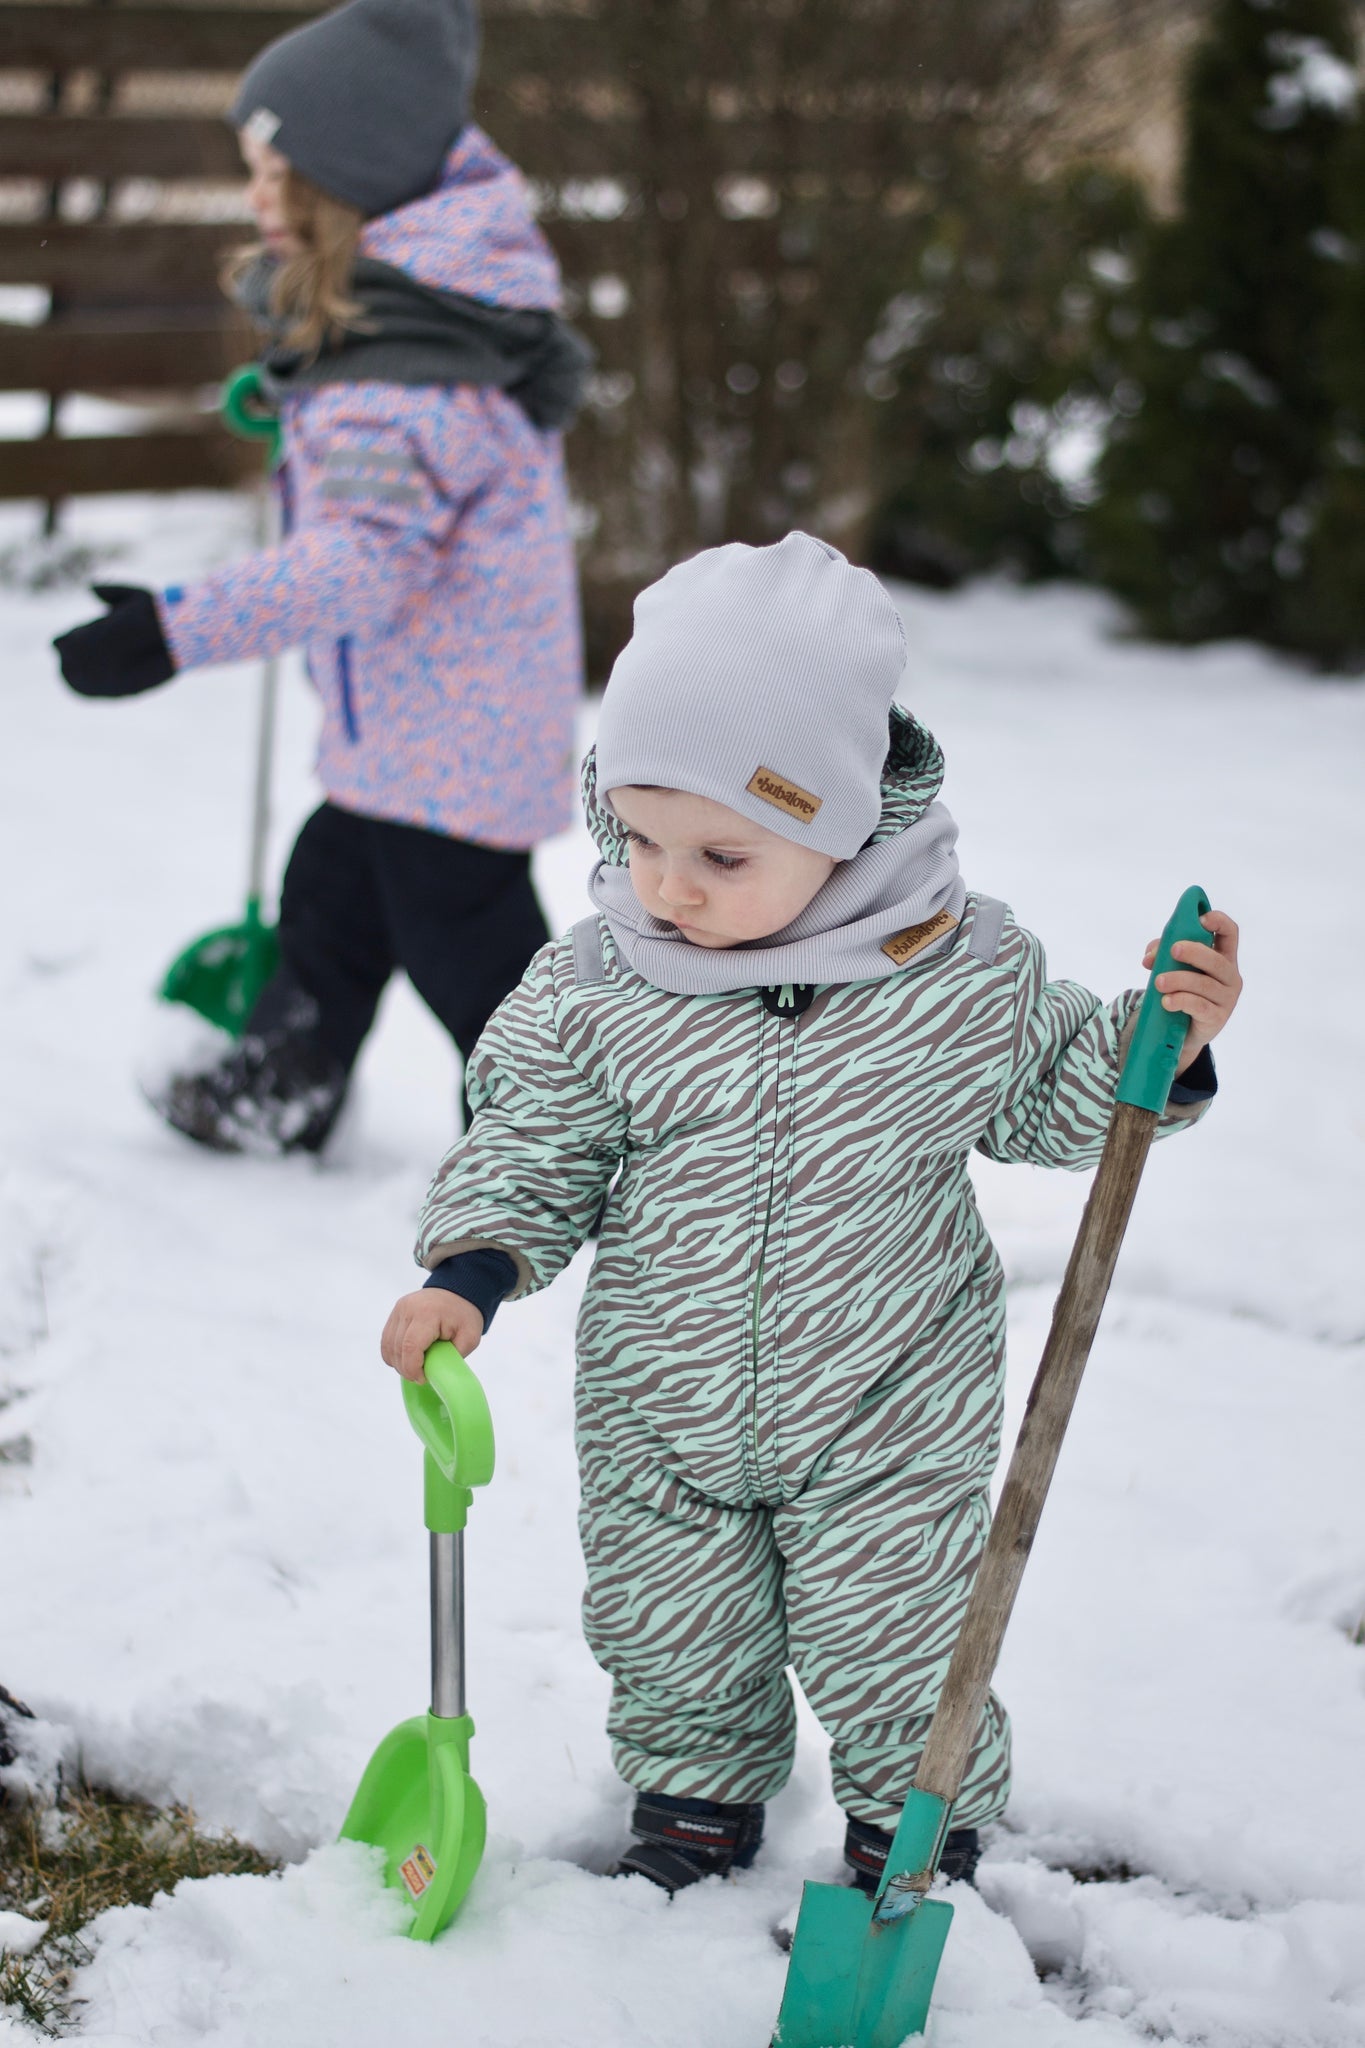 <tc>Ducksday</tc>  winter overalls for children up to 98cm tall